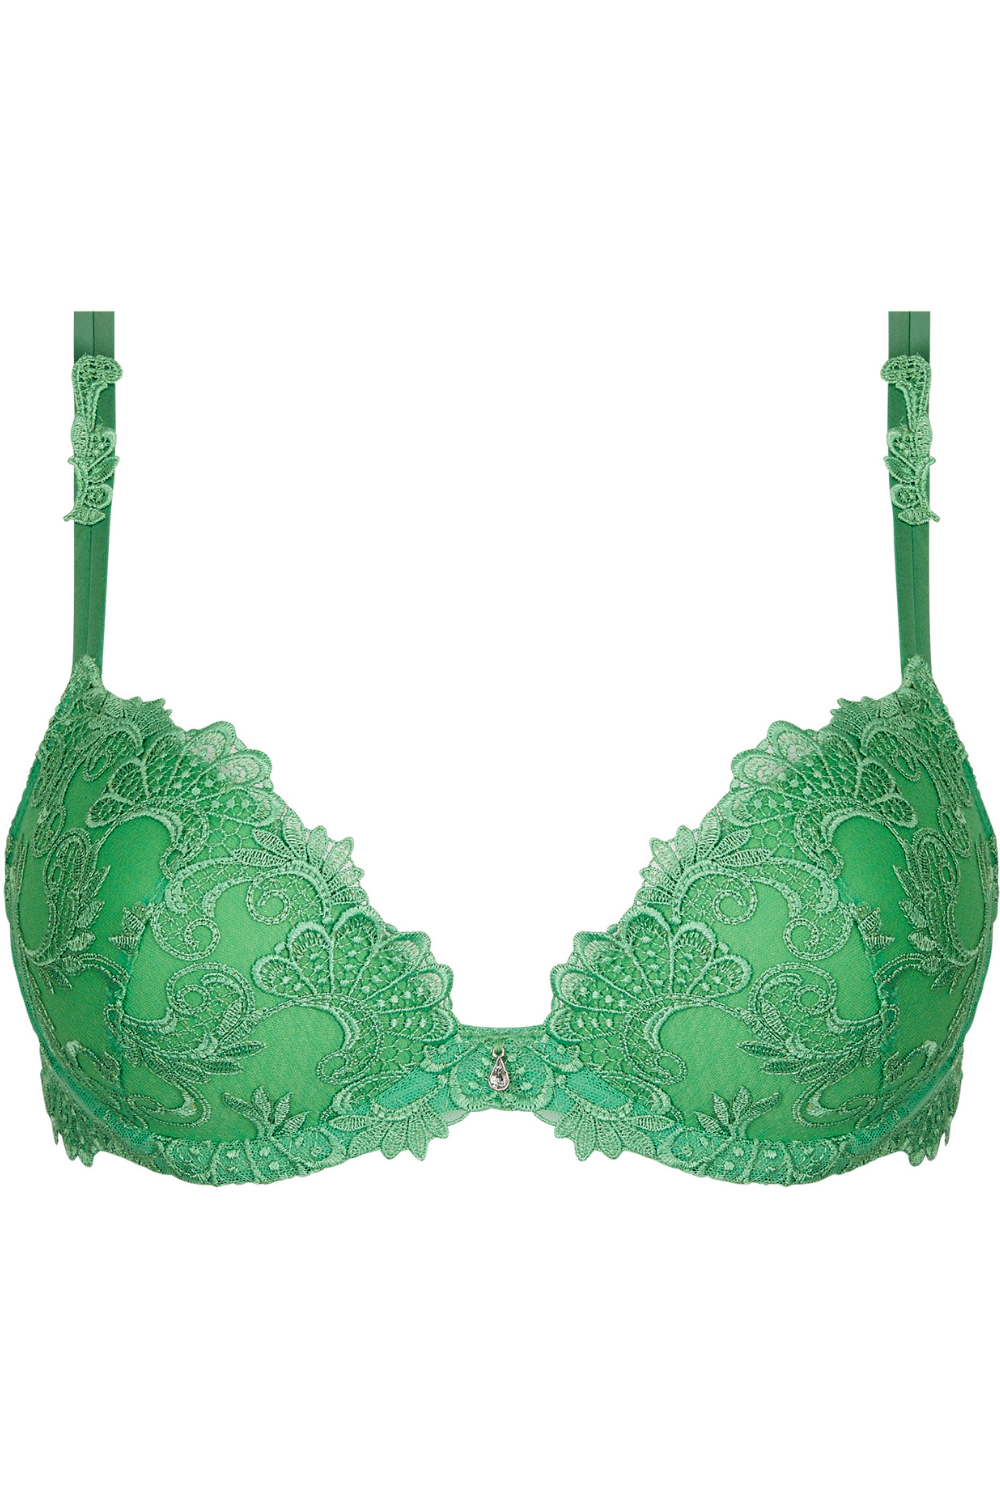 Lise Charmel Dressing Floral Padded Contour Bra Green – Naughty Knickers